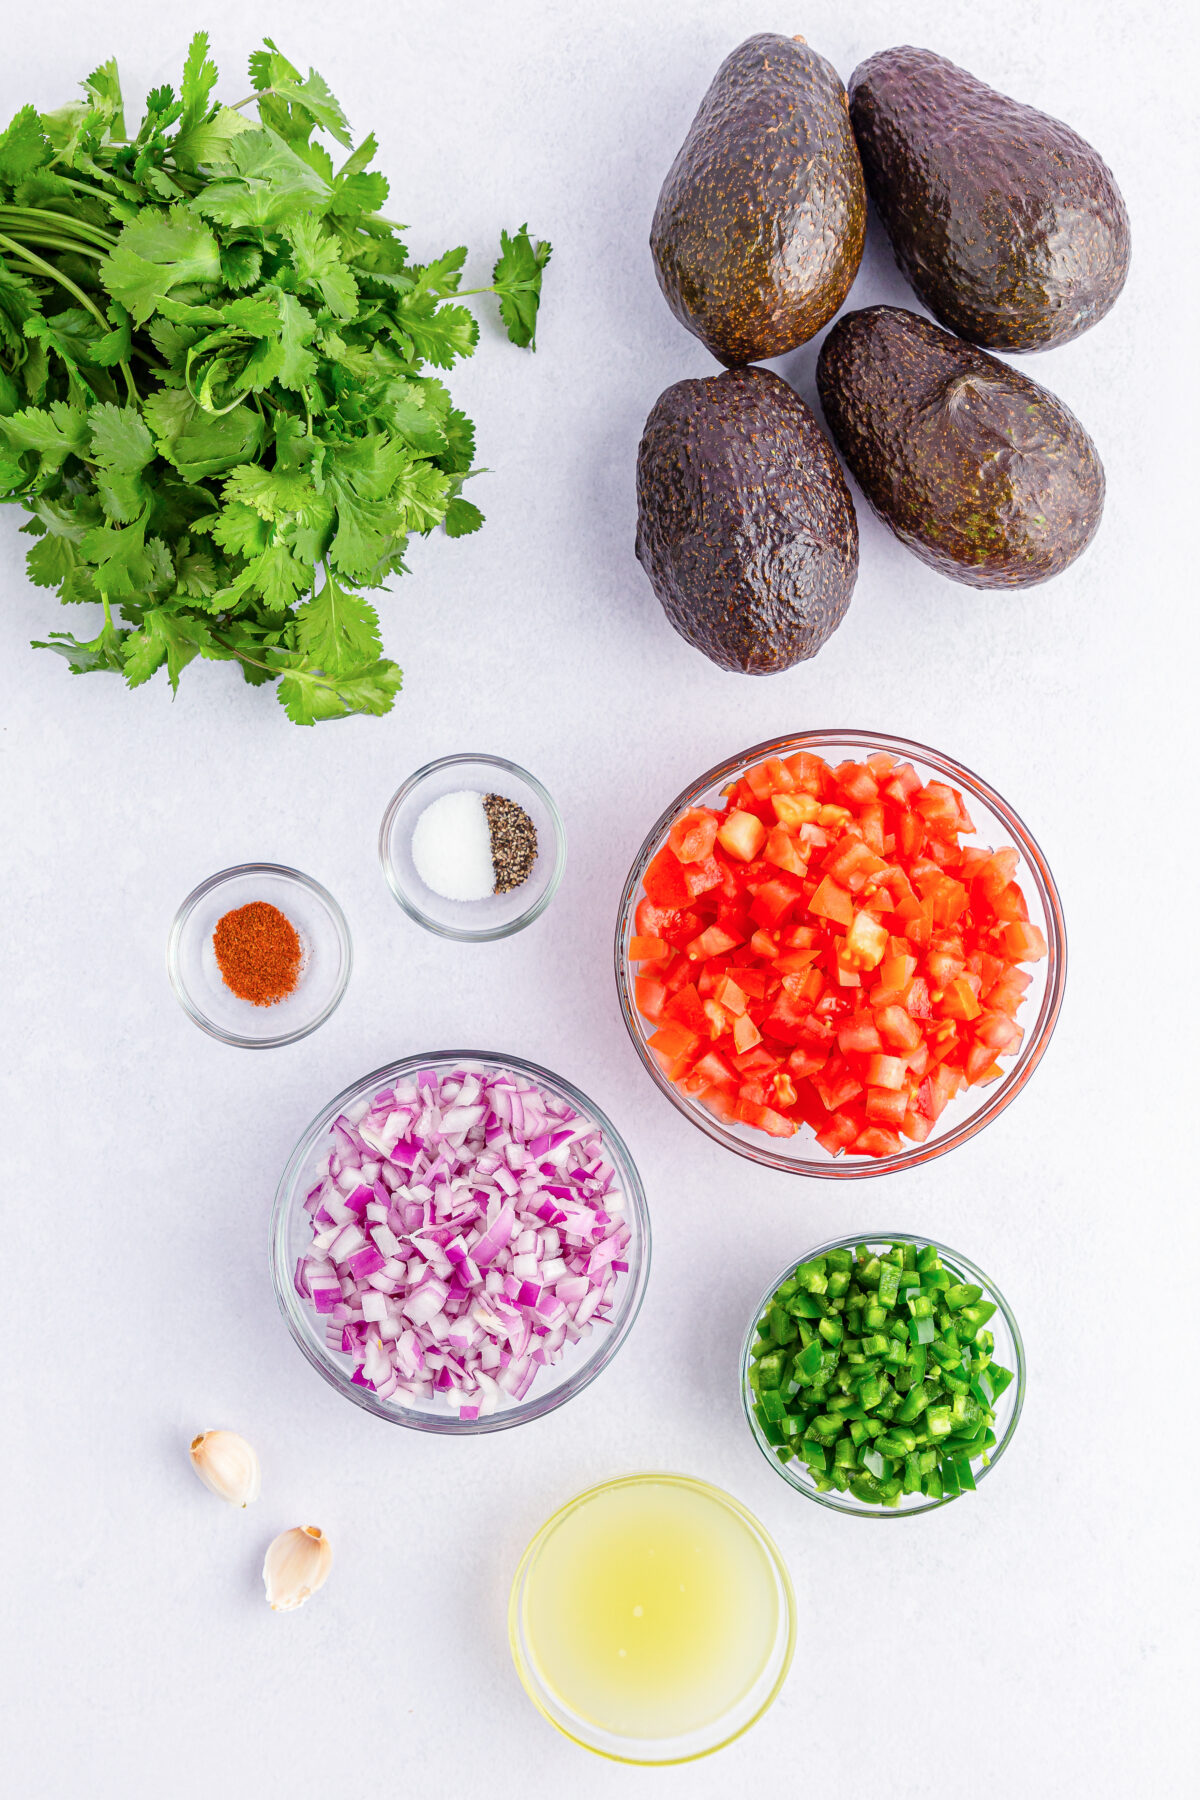 Ingredients for homemade chunky guacamole.